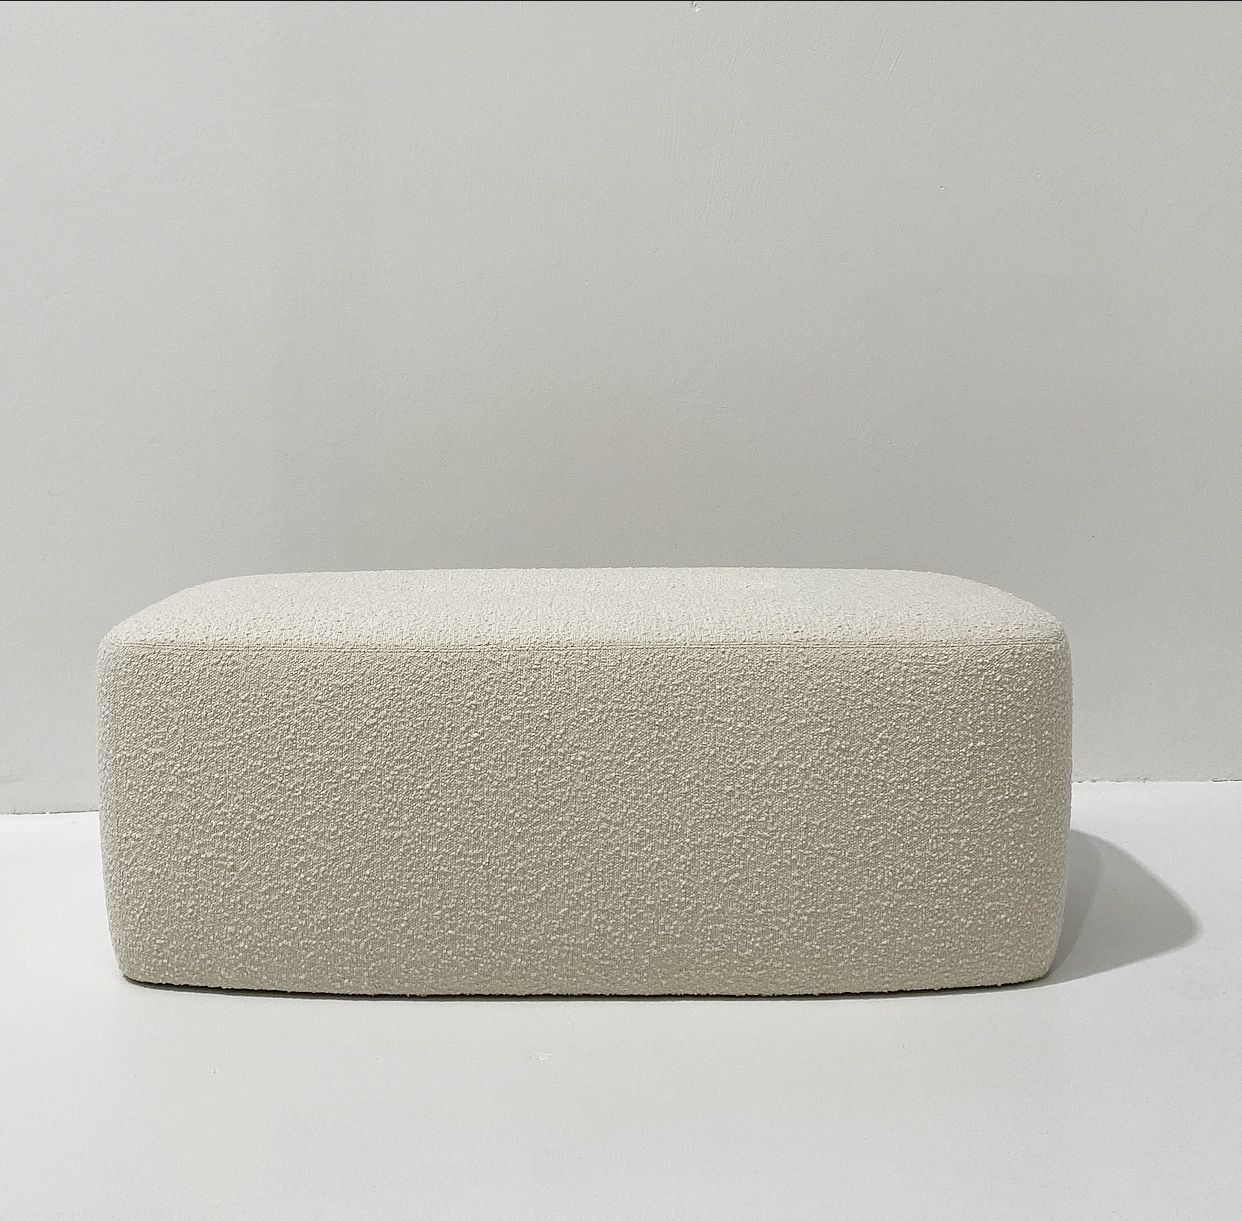 Boucle Ottomans Intended For Most Current Cream Boucle Ottoman (View 6 of 15)